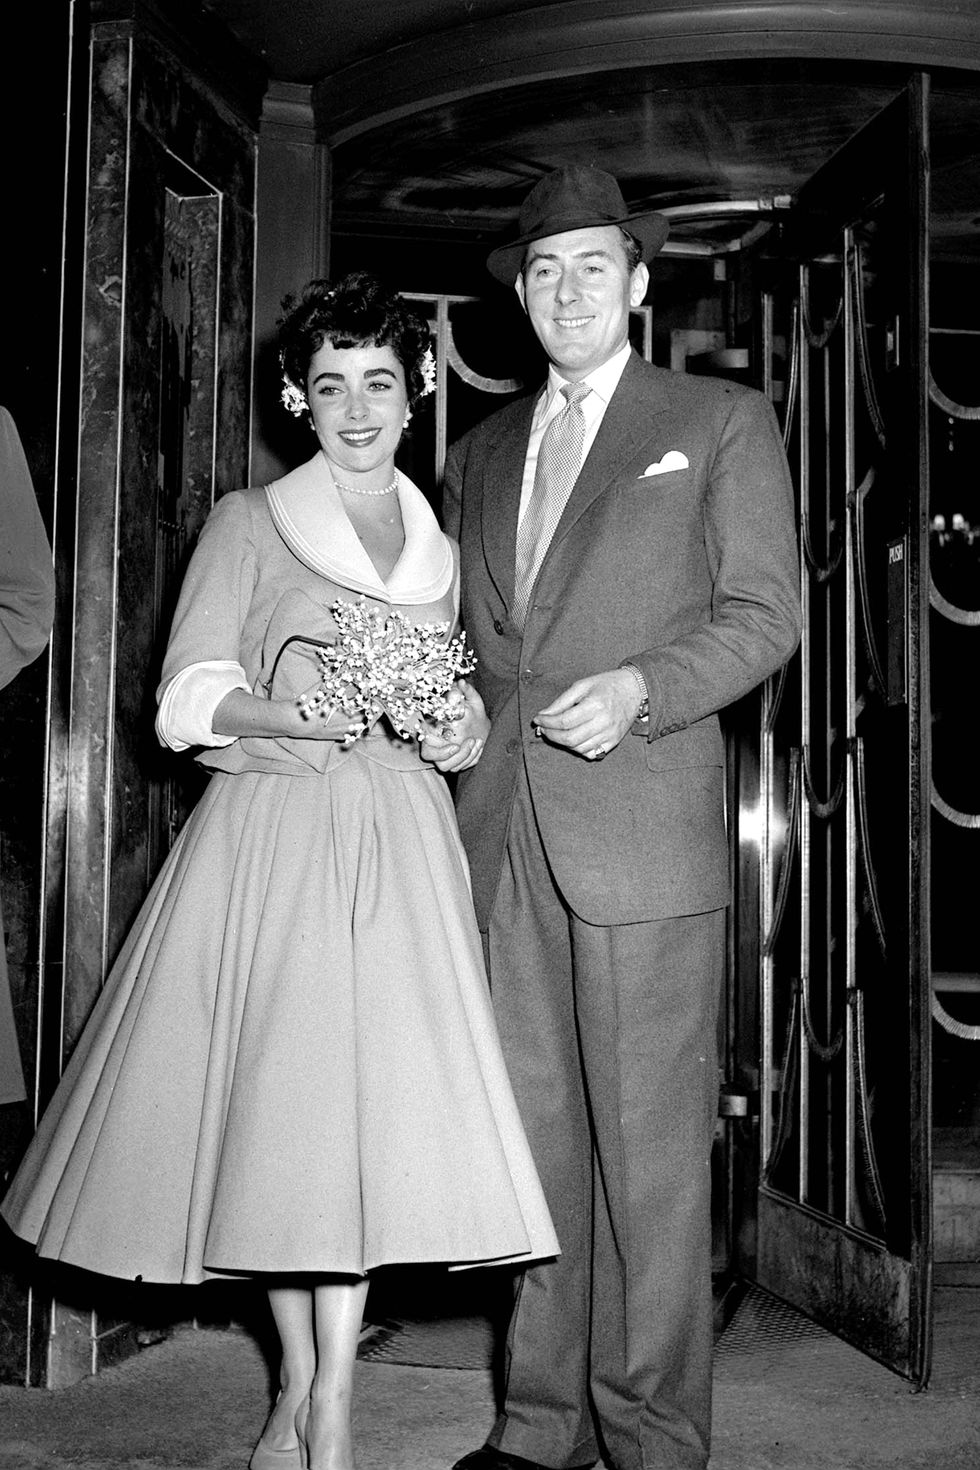 Film, 21st February 1952, Caxton Hall Registery Office, London, The wedding of film stars Michael Wilding and Elizabeth Taylor (Photo by Popperfoto/Getty Images)